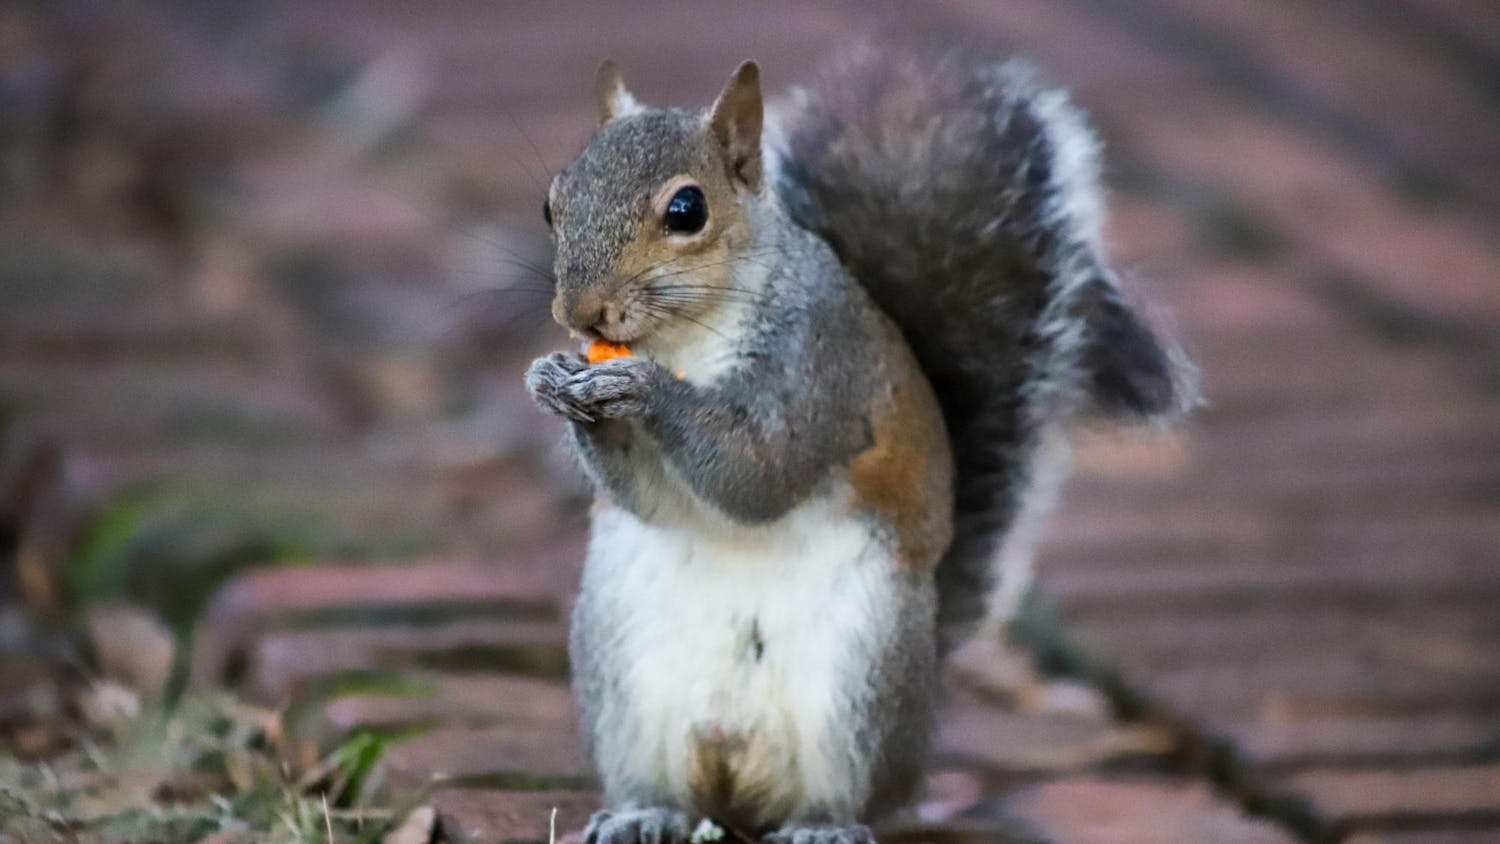 FILE - A squirrel eats on one of the various brick-lined paths on the Horseshoe in the center of the University of South Carolina Campus on Jan. 30, 2023. The Horseshoe is one of many places on campus where students can sit and observe members of the campus squirrel population.